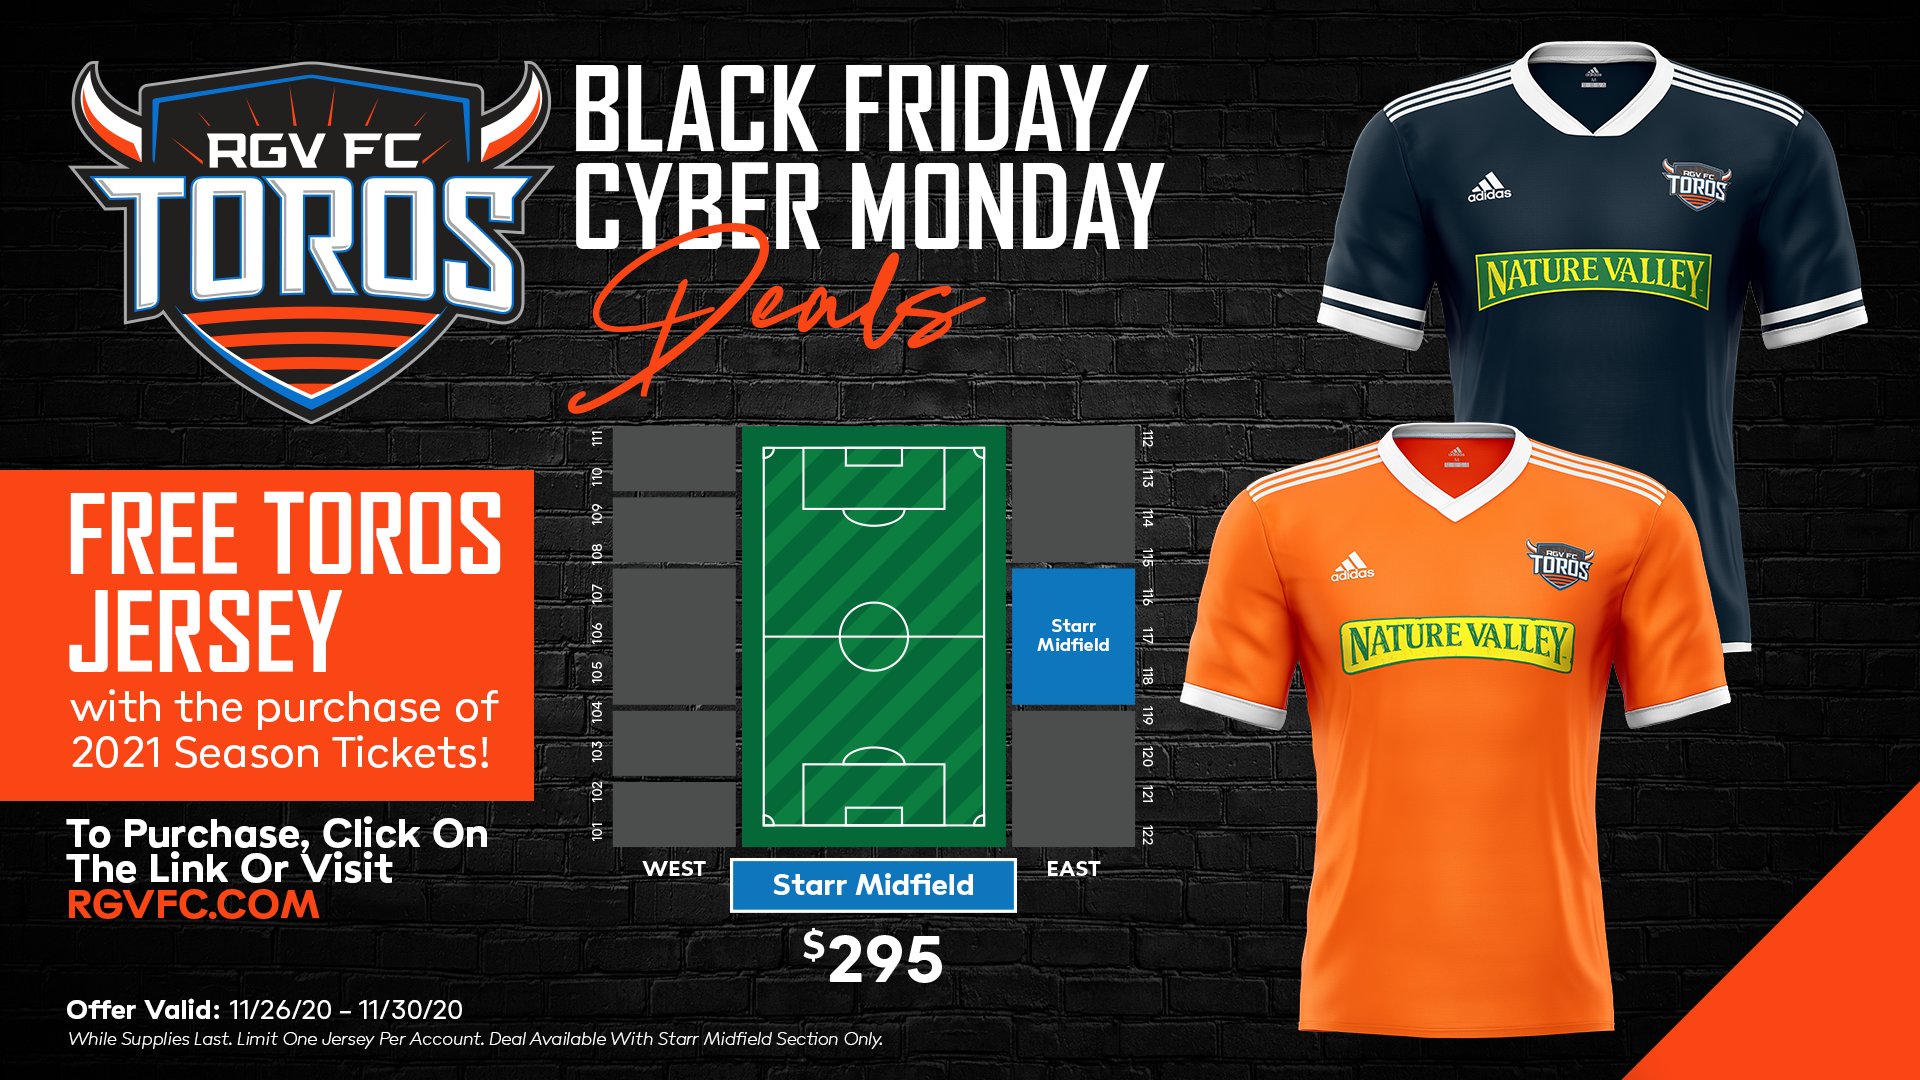 Grande Valley FC on Twitter: "The deals start NOW with RGV FC! Don't miss out on the Season of Saving with our limited-time offers! You want to miss out!